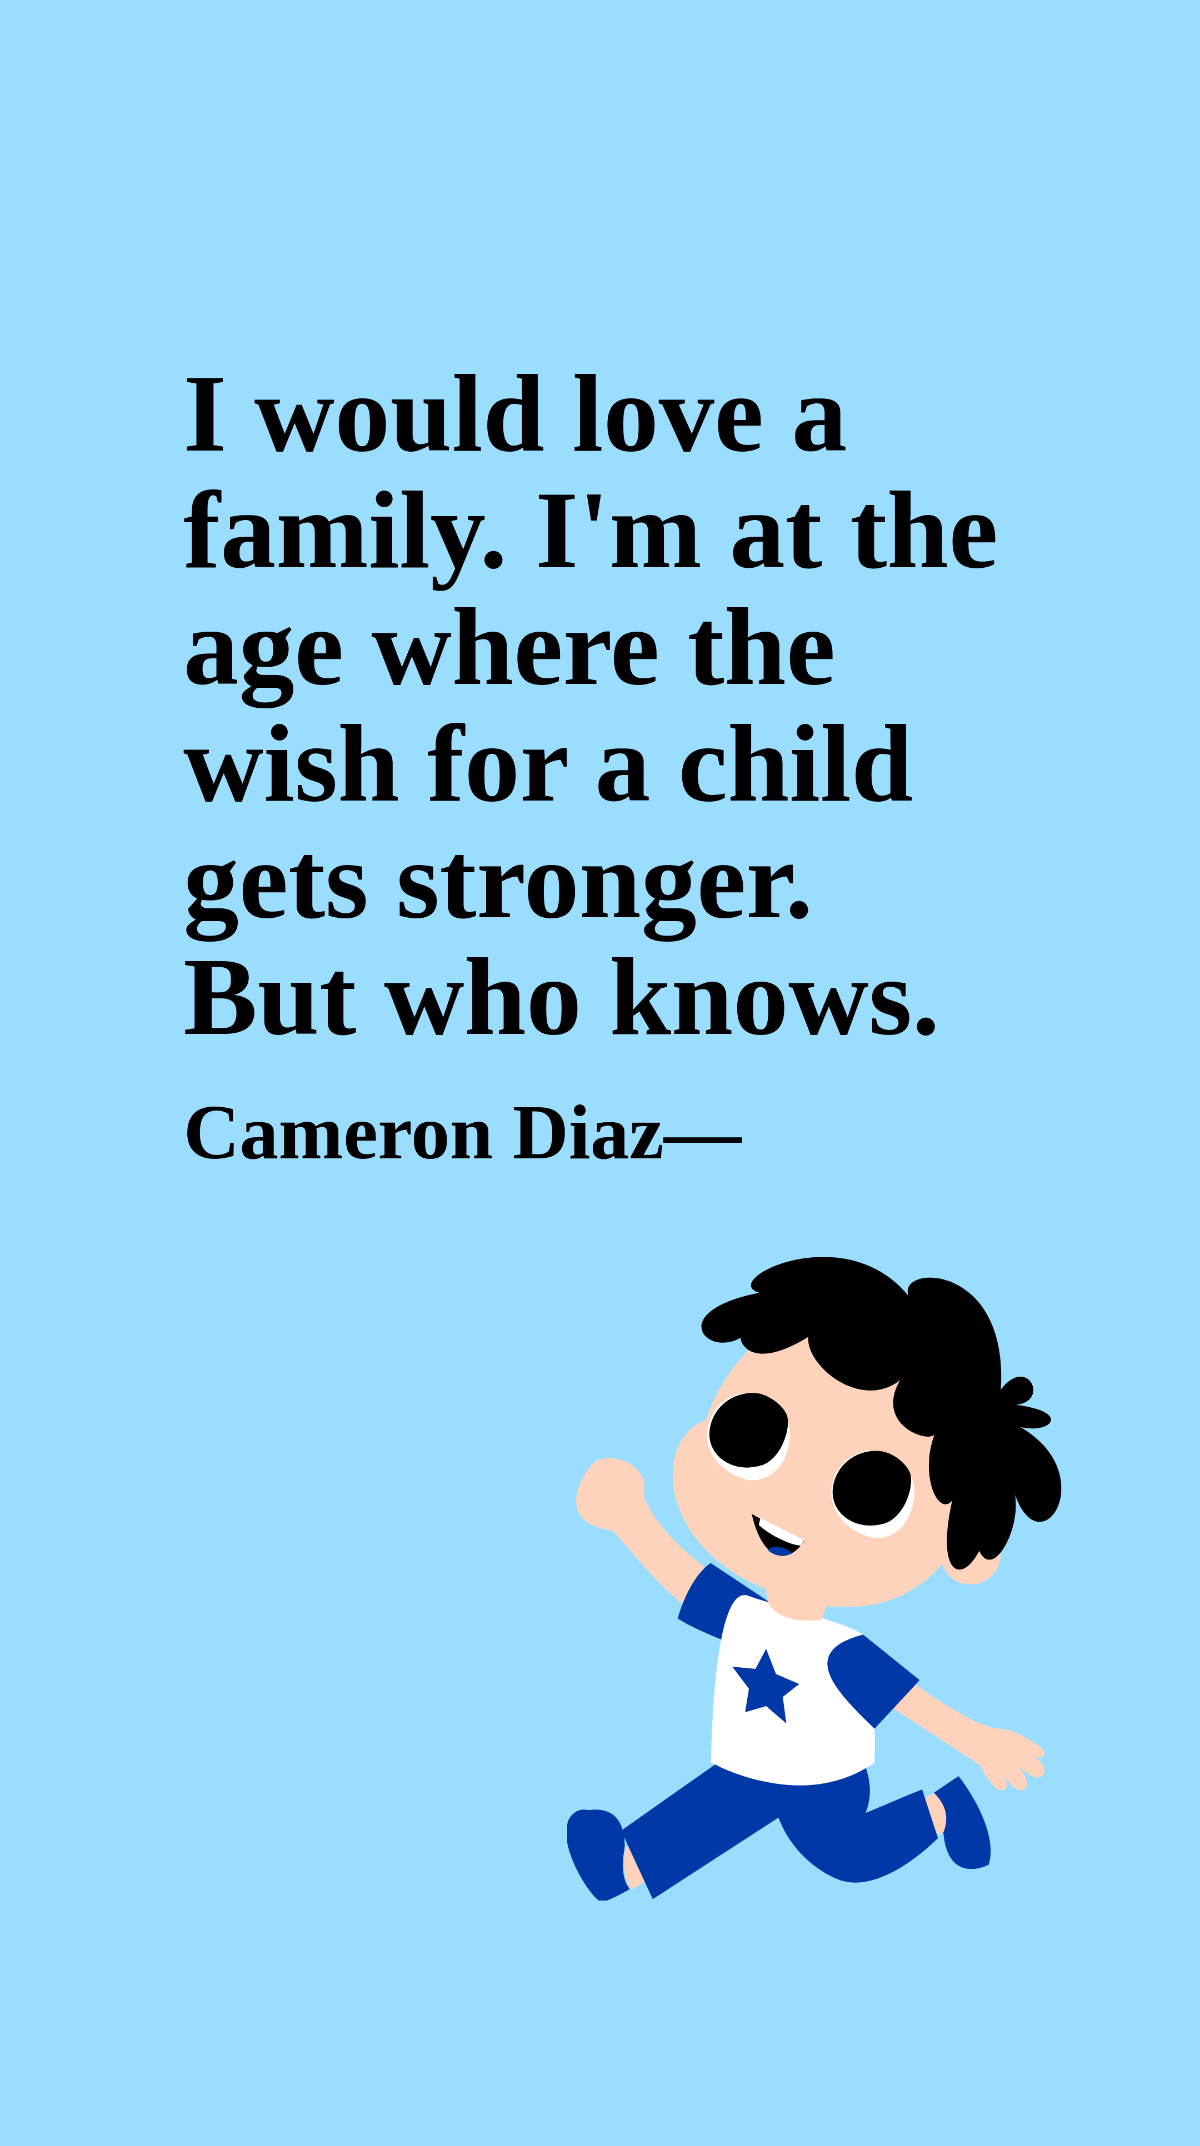 Cameron Diaz - I would love a family. I'm at the age where the wish for a child gets stronger. But who knows.